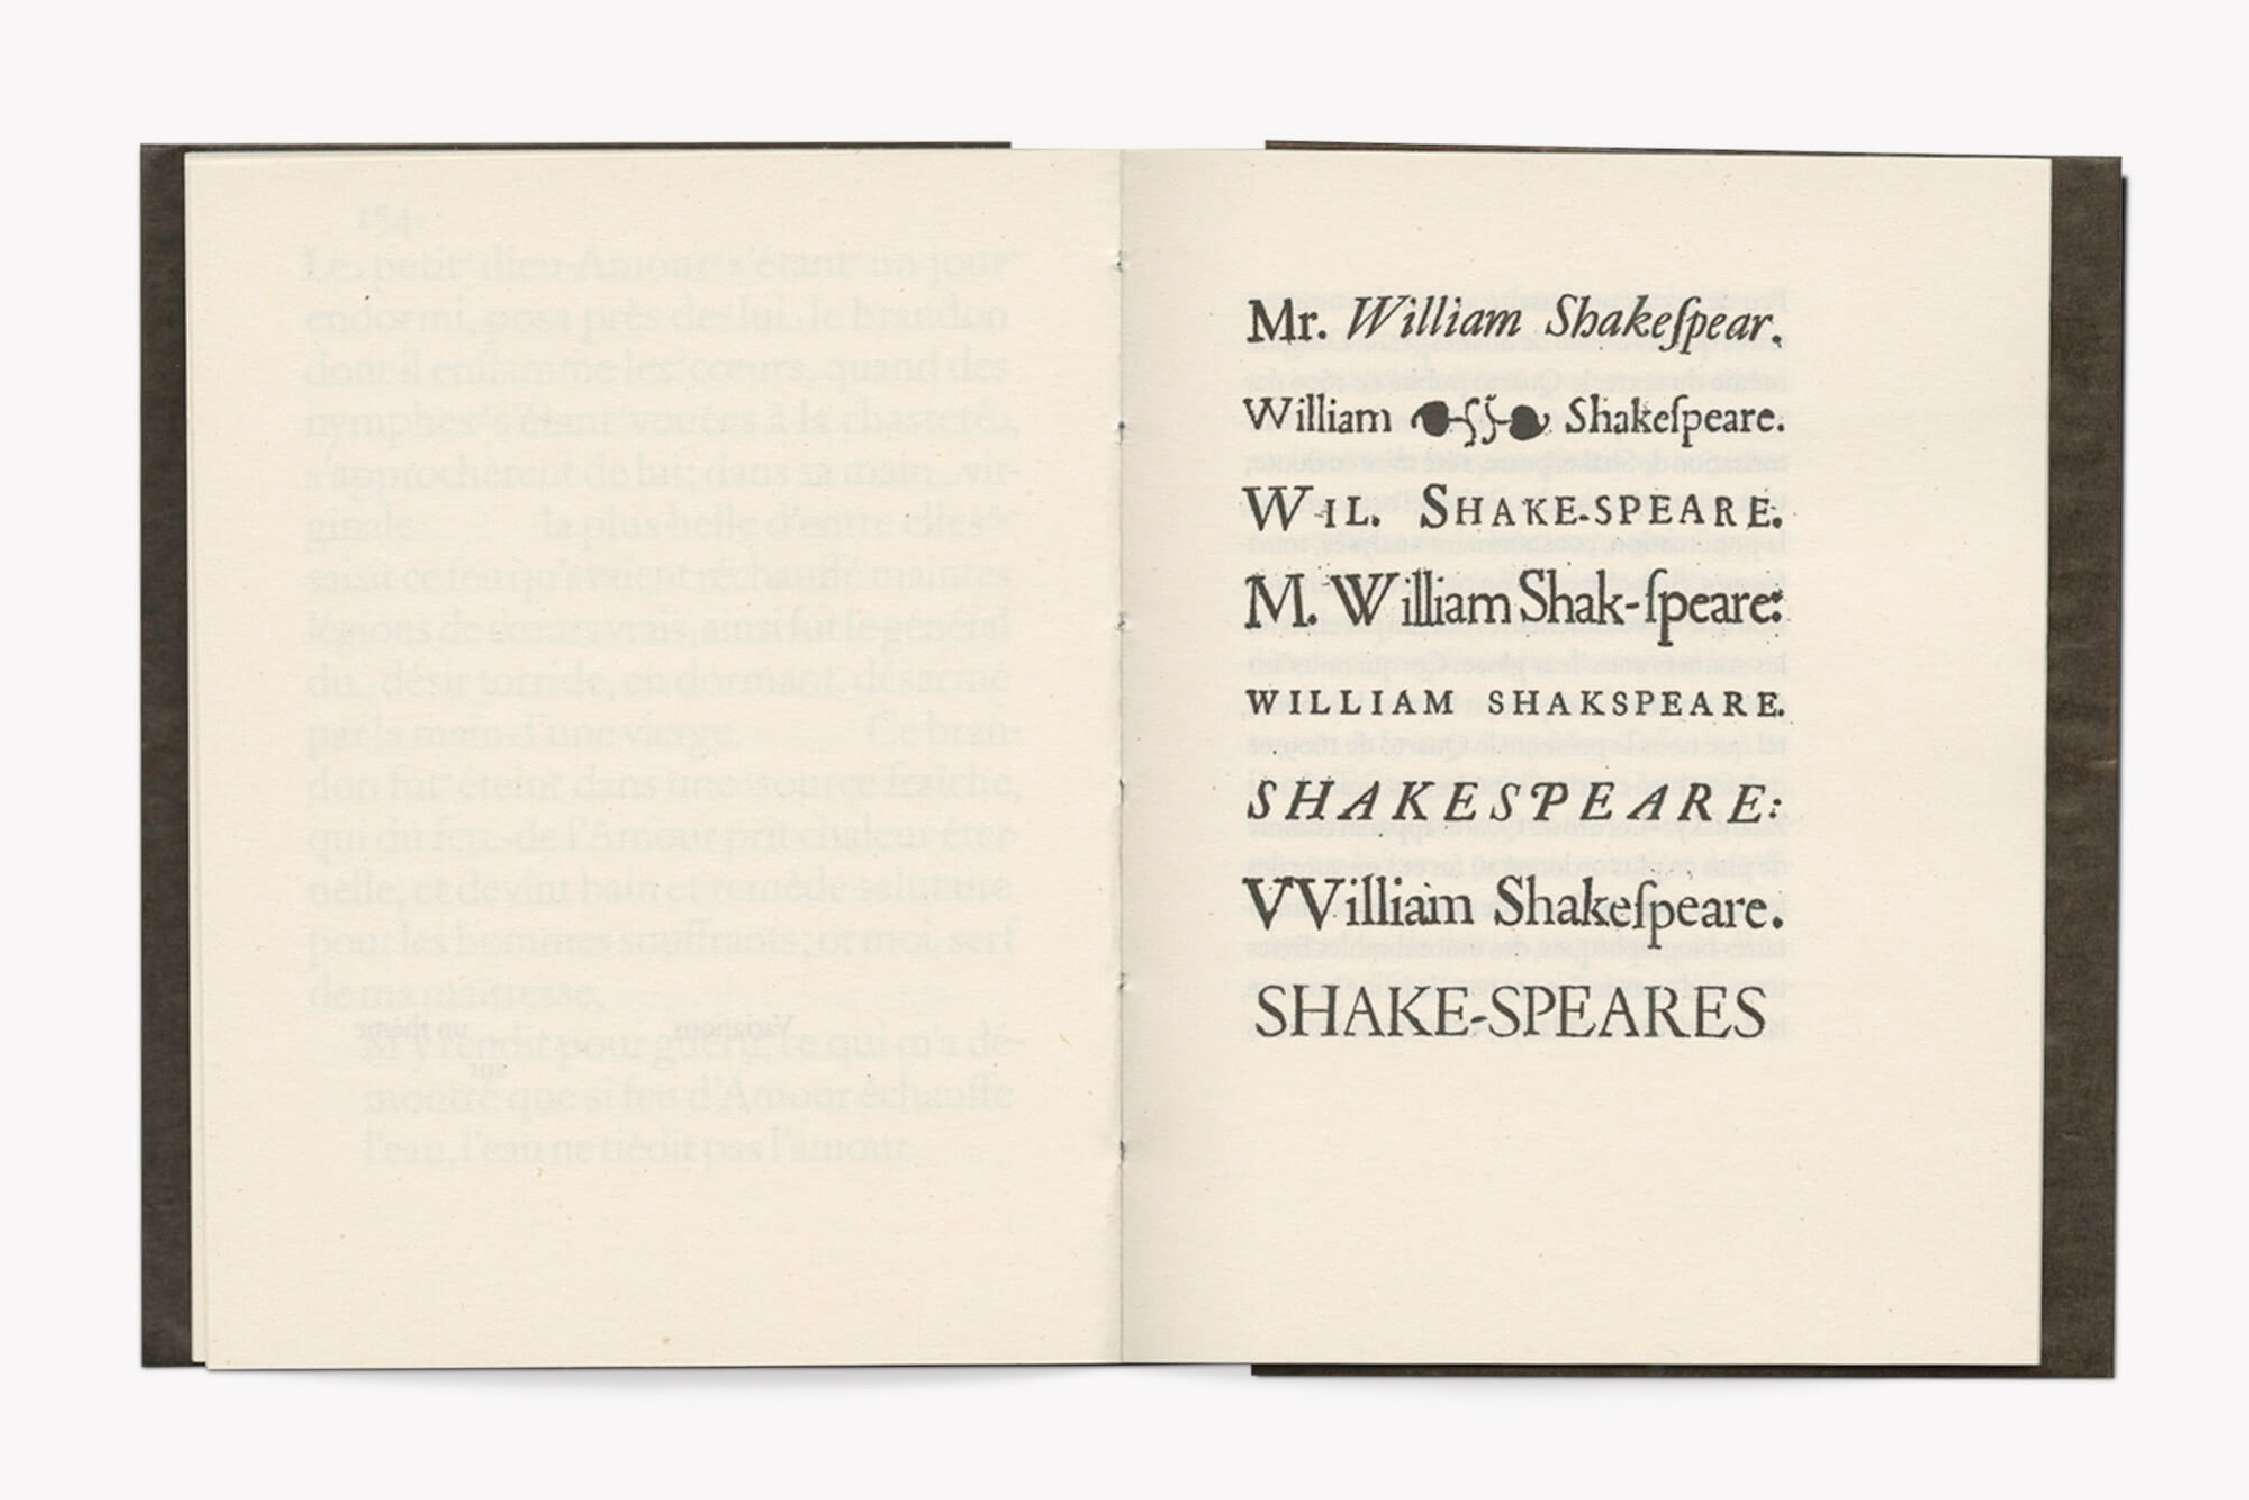 William Shakespear - Sonnets Sonnets Editions Cent Pages - interieur shakespear compositio SP millot